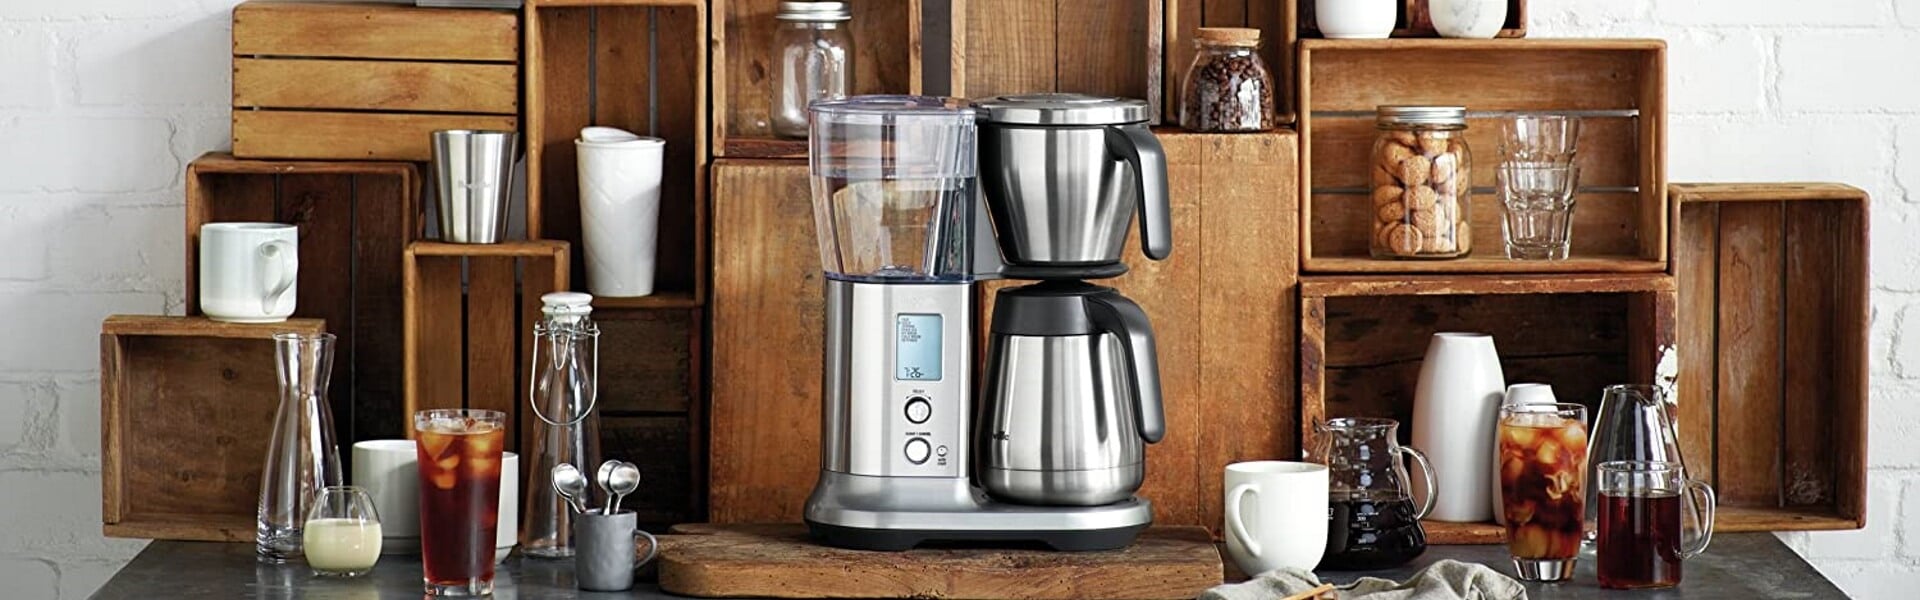 5 Best SCAA Coffee Makers [Dec. 2020] Detailed Reviews